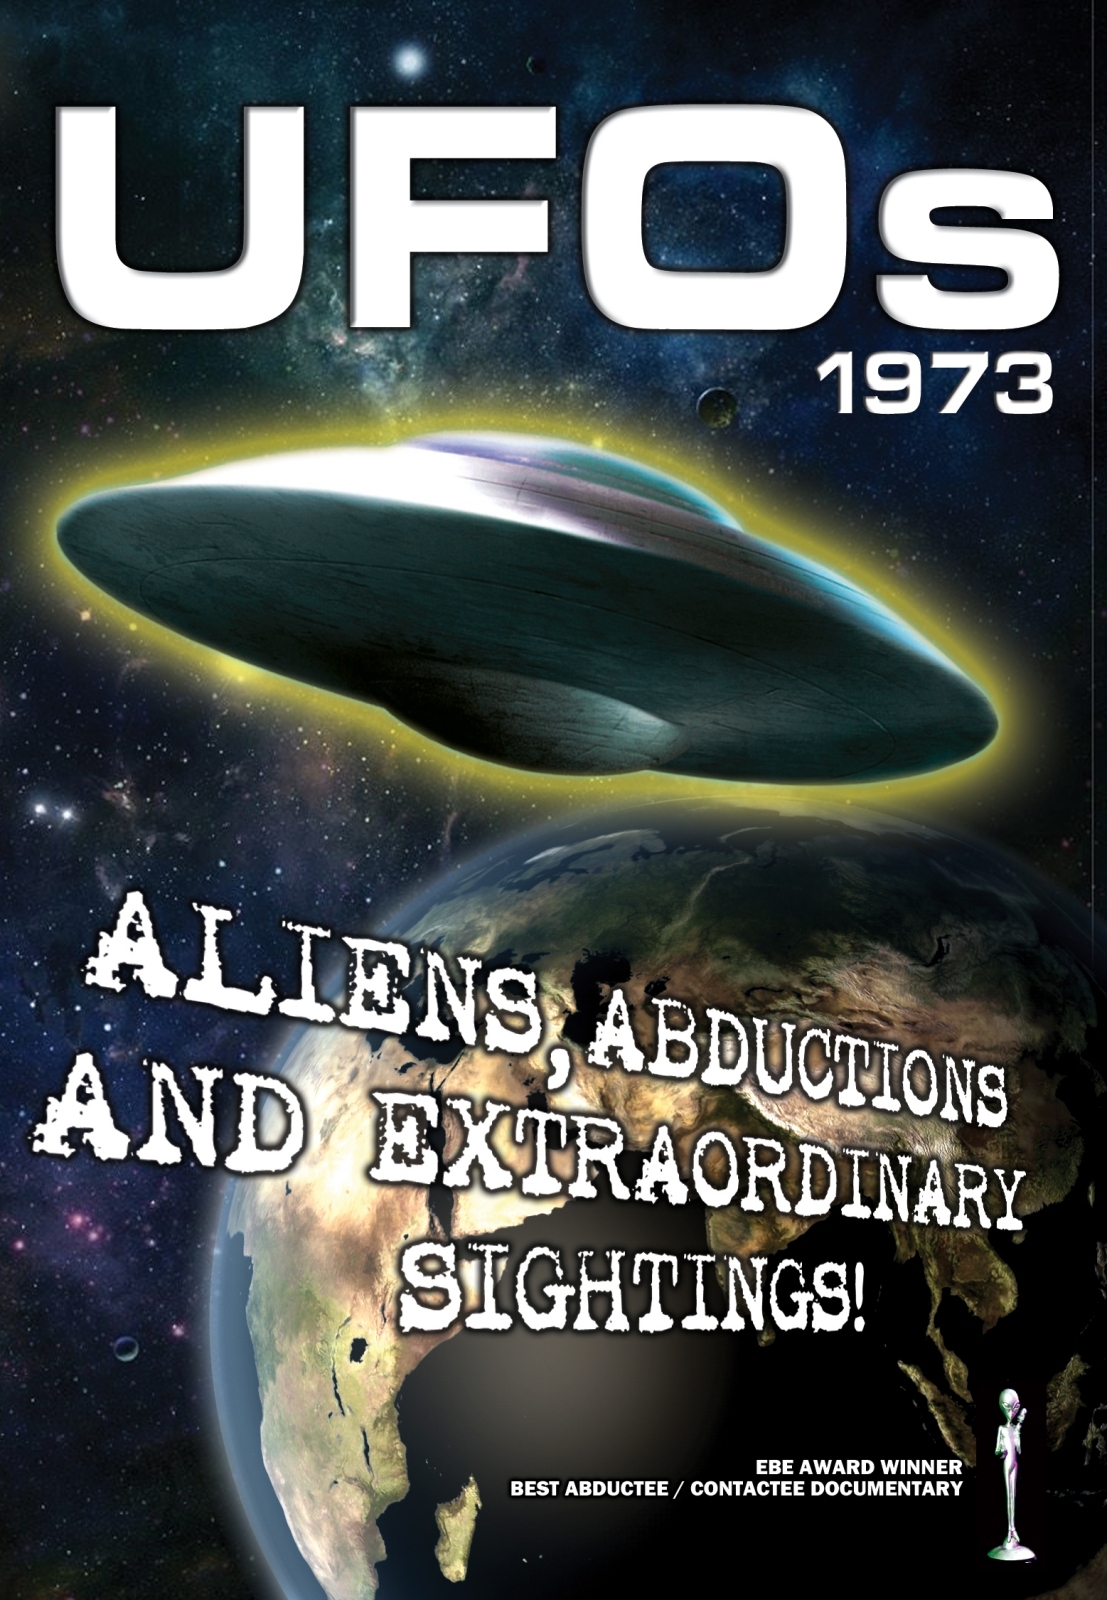 UFOs 1973: Aliens, Abductions and Extraordinary Sightings (2010) Screenshot 1